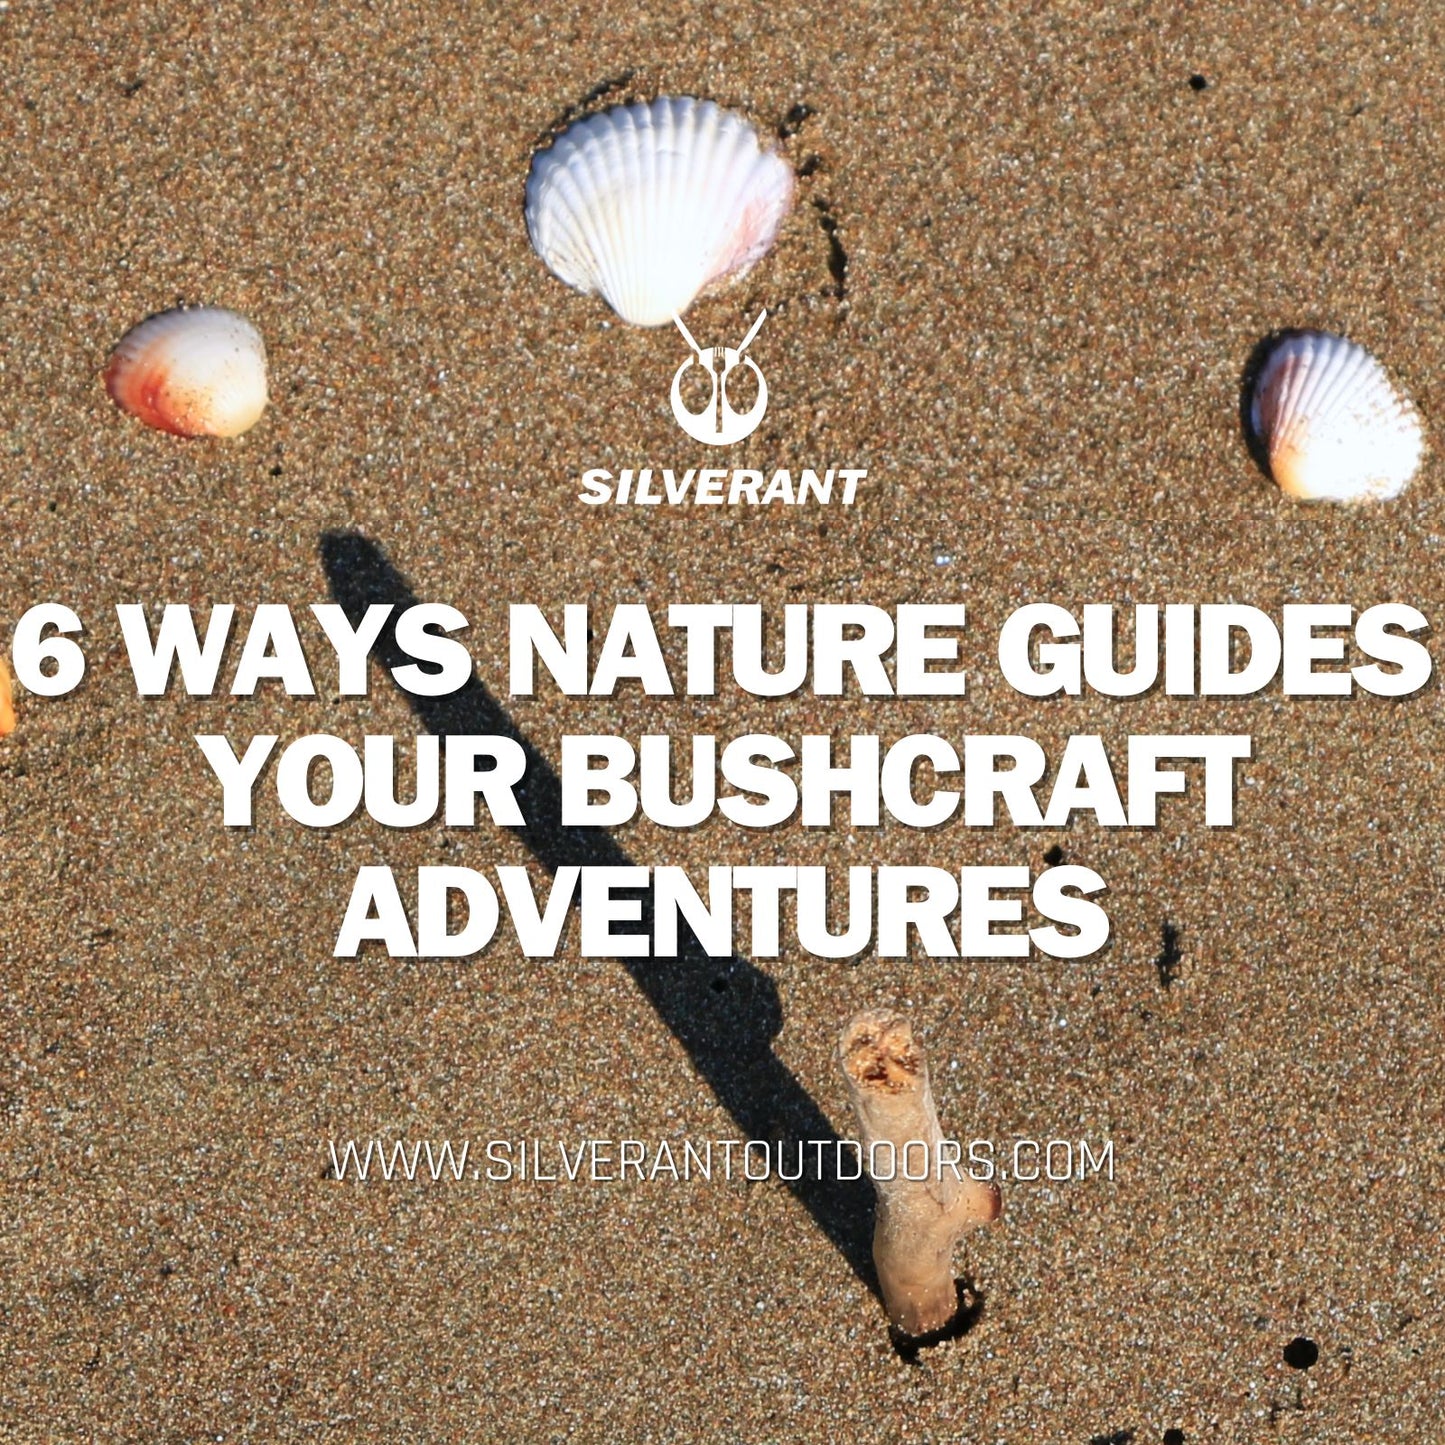 6 Ways Nature Guides Your Bushcraft Adventures - SilverAnt Outdoors